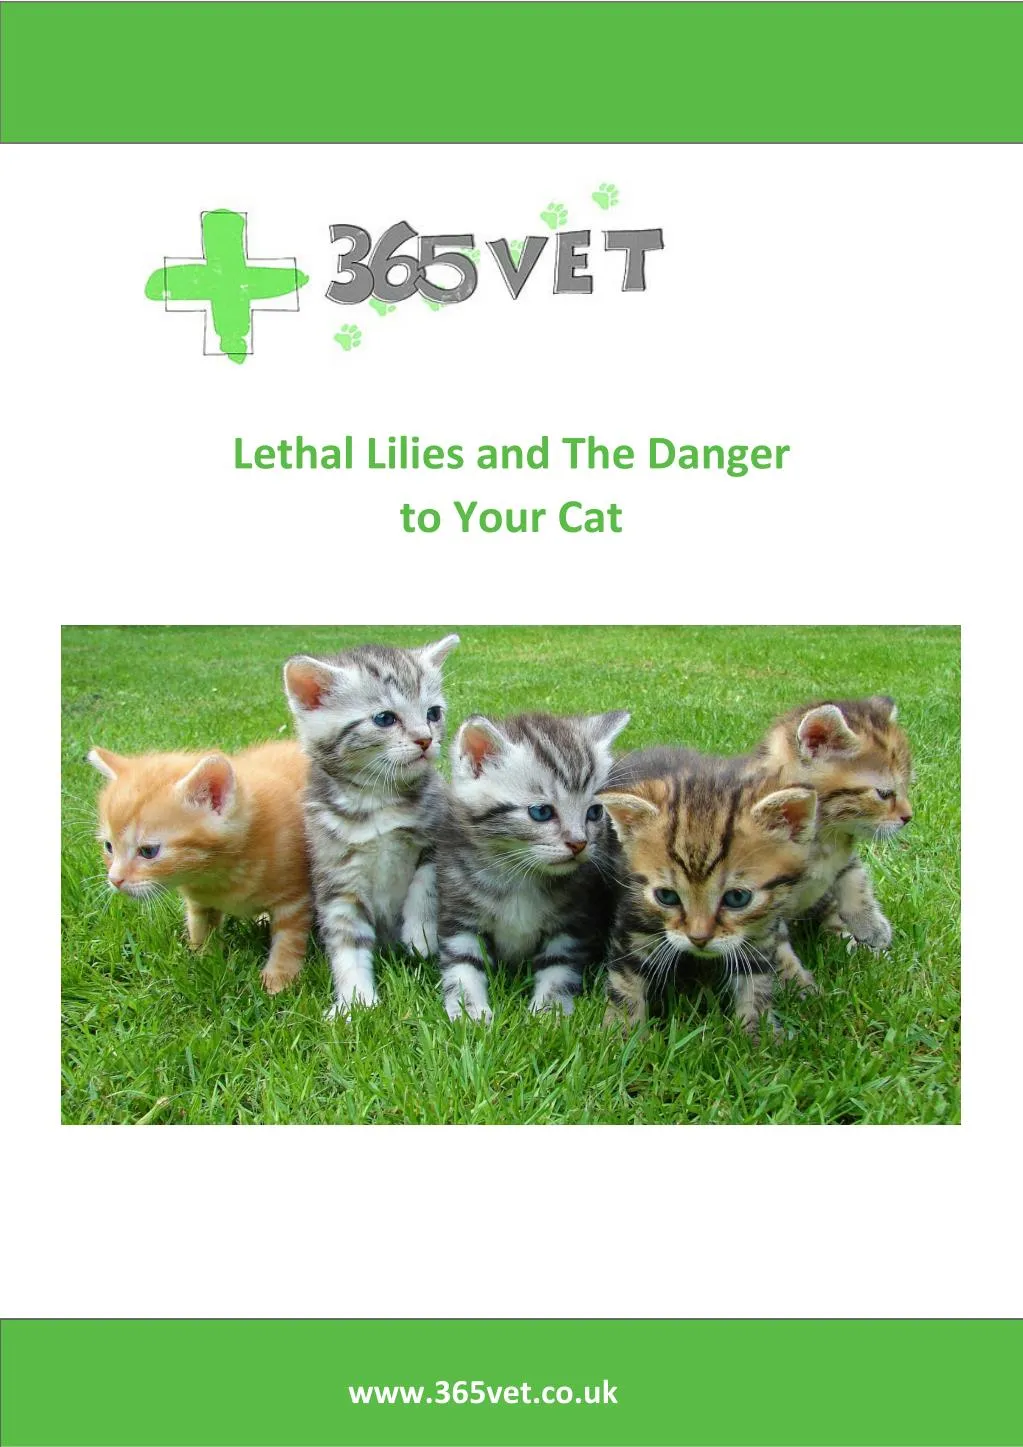 lethal lilies and the danger to your cat